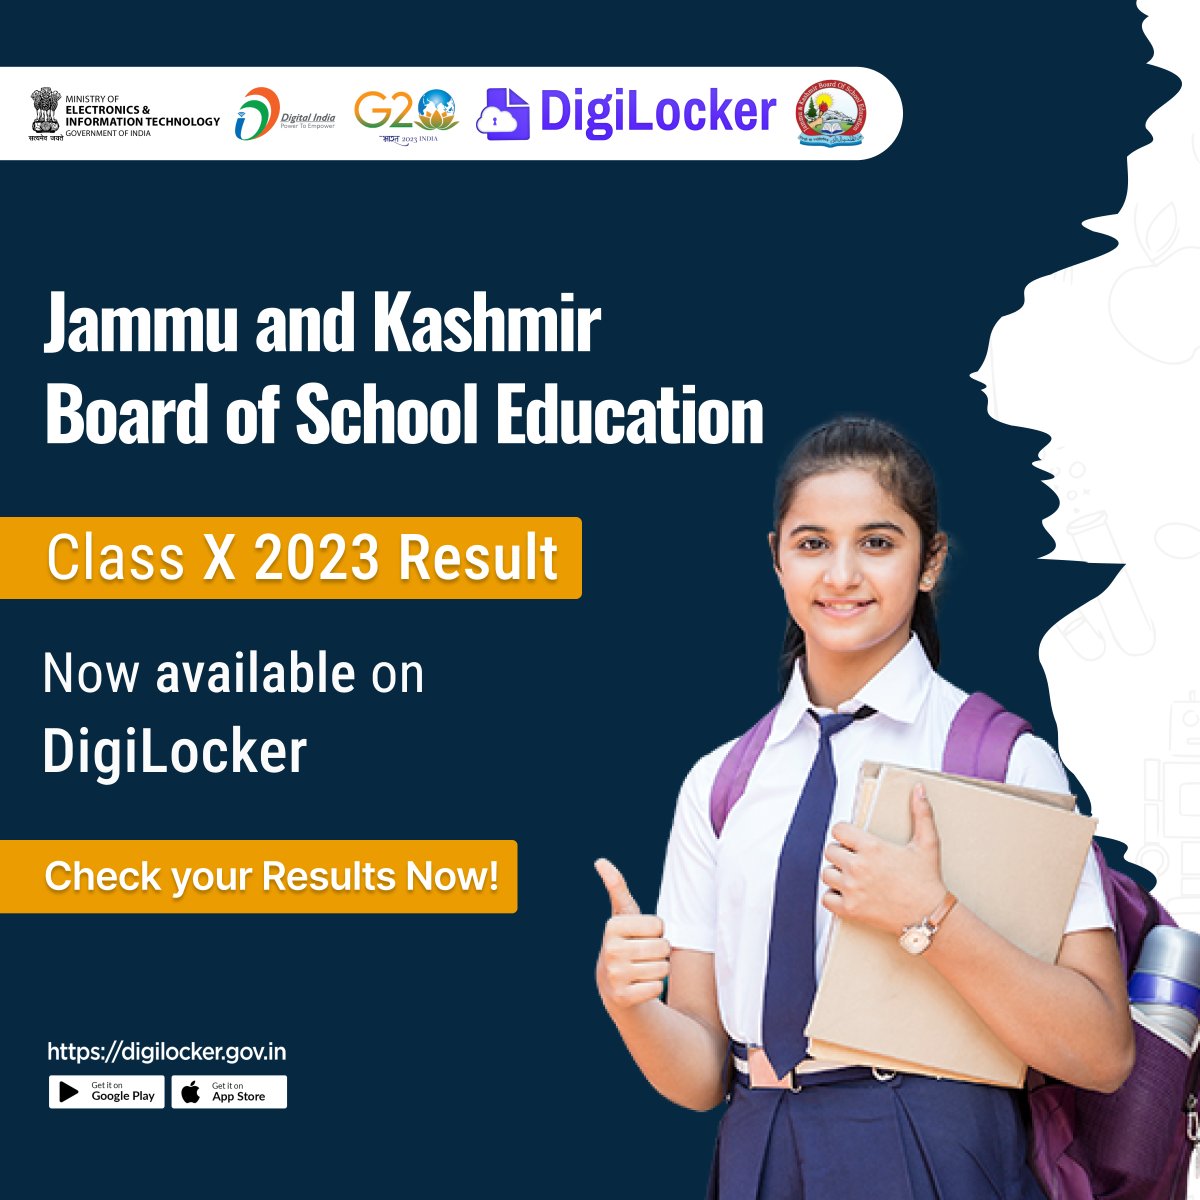 Big announcement for Jammu and Kashmir Class X students! Your 2023 results are now available on #DigiLocker. Access your result certificates instantly and securely. Congratulations on your achievements👍digilocker.gov.in/installapp
#JKBOSE #ClassX @diprjk @Office_JKBoSE